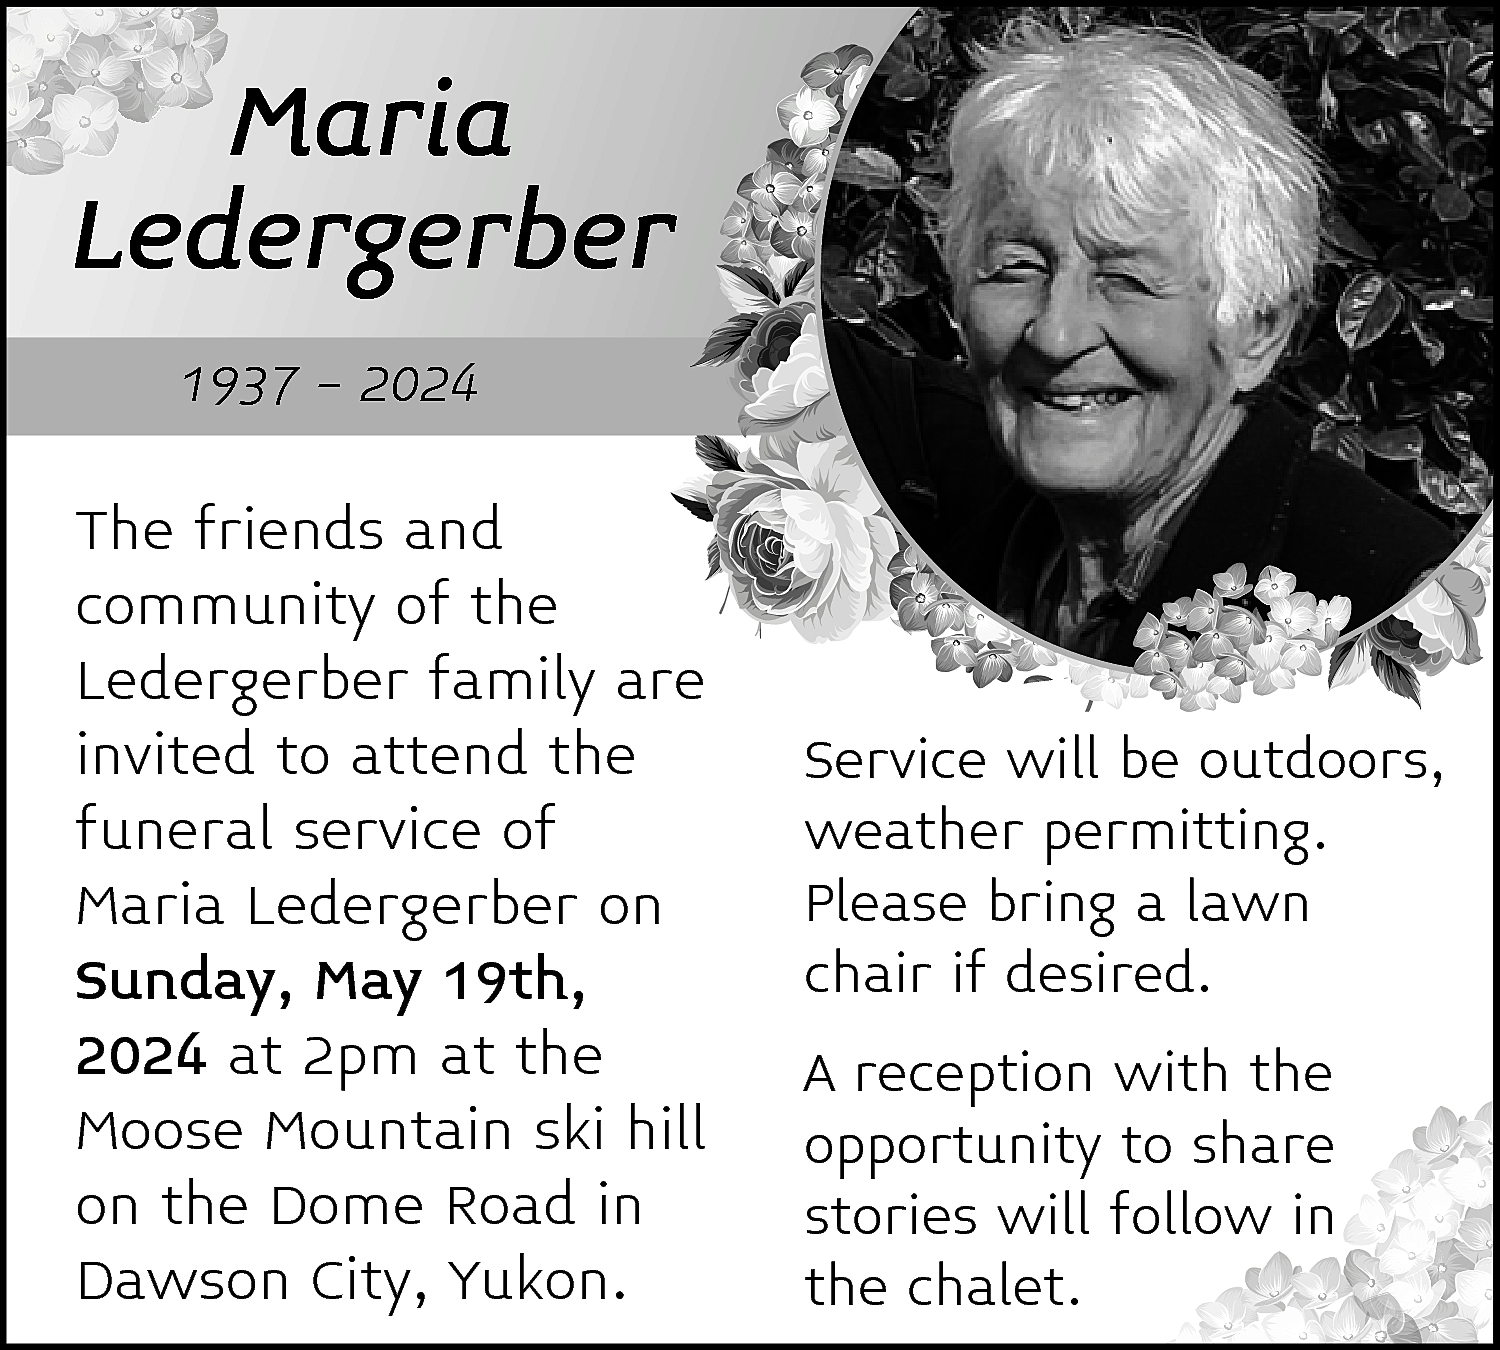 Maria <br>Ledergerber <br>1937 - 2024  Maria  Ledergerber  1937 - 2024    The friends and  community of the  Ledergerber family are  invited to attend the  funeral service of  Maria Ledergerber on  Sunday, May 19th,  2024 at 2pm at the  Moose Mountain ski hill  on the Dome Road in  Dawson City, Yukon.    Service will be outdoors,  weather permitting.  Please bring a lawn  chair if desired.  A reception with the  opportunity to share  stories will follow in  the chalet.    